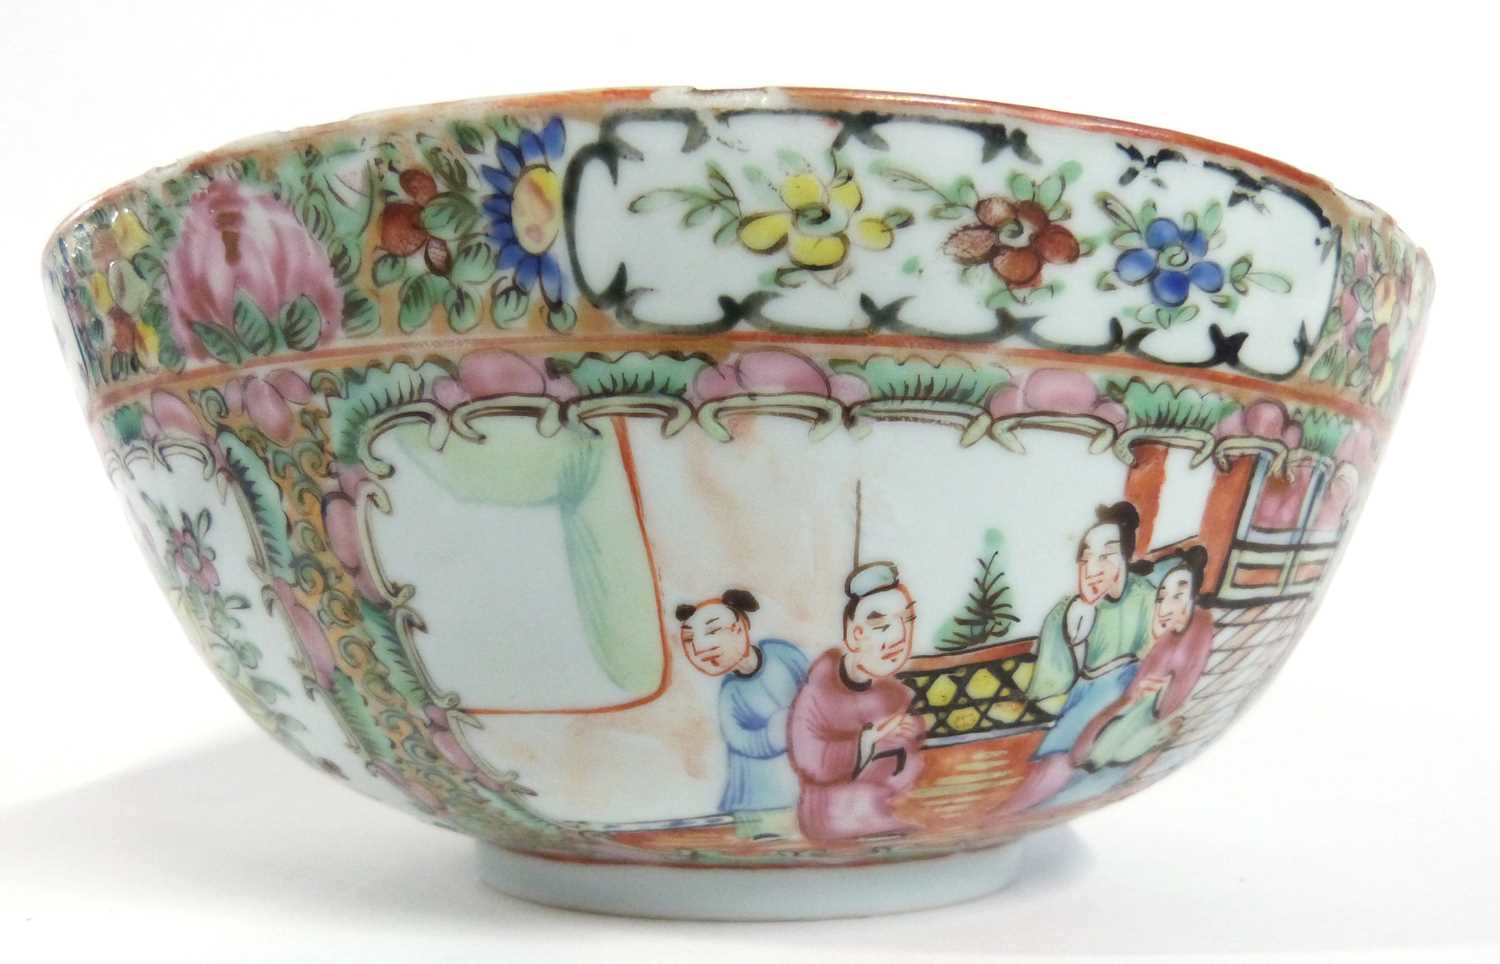 A 20th Century Cantonese porcelain bowl with typical polychrome decoration of flowers and figures - Image 5 of 15